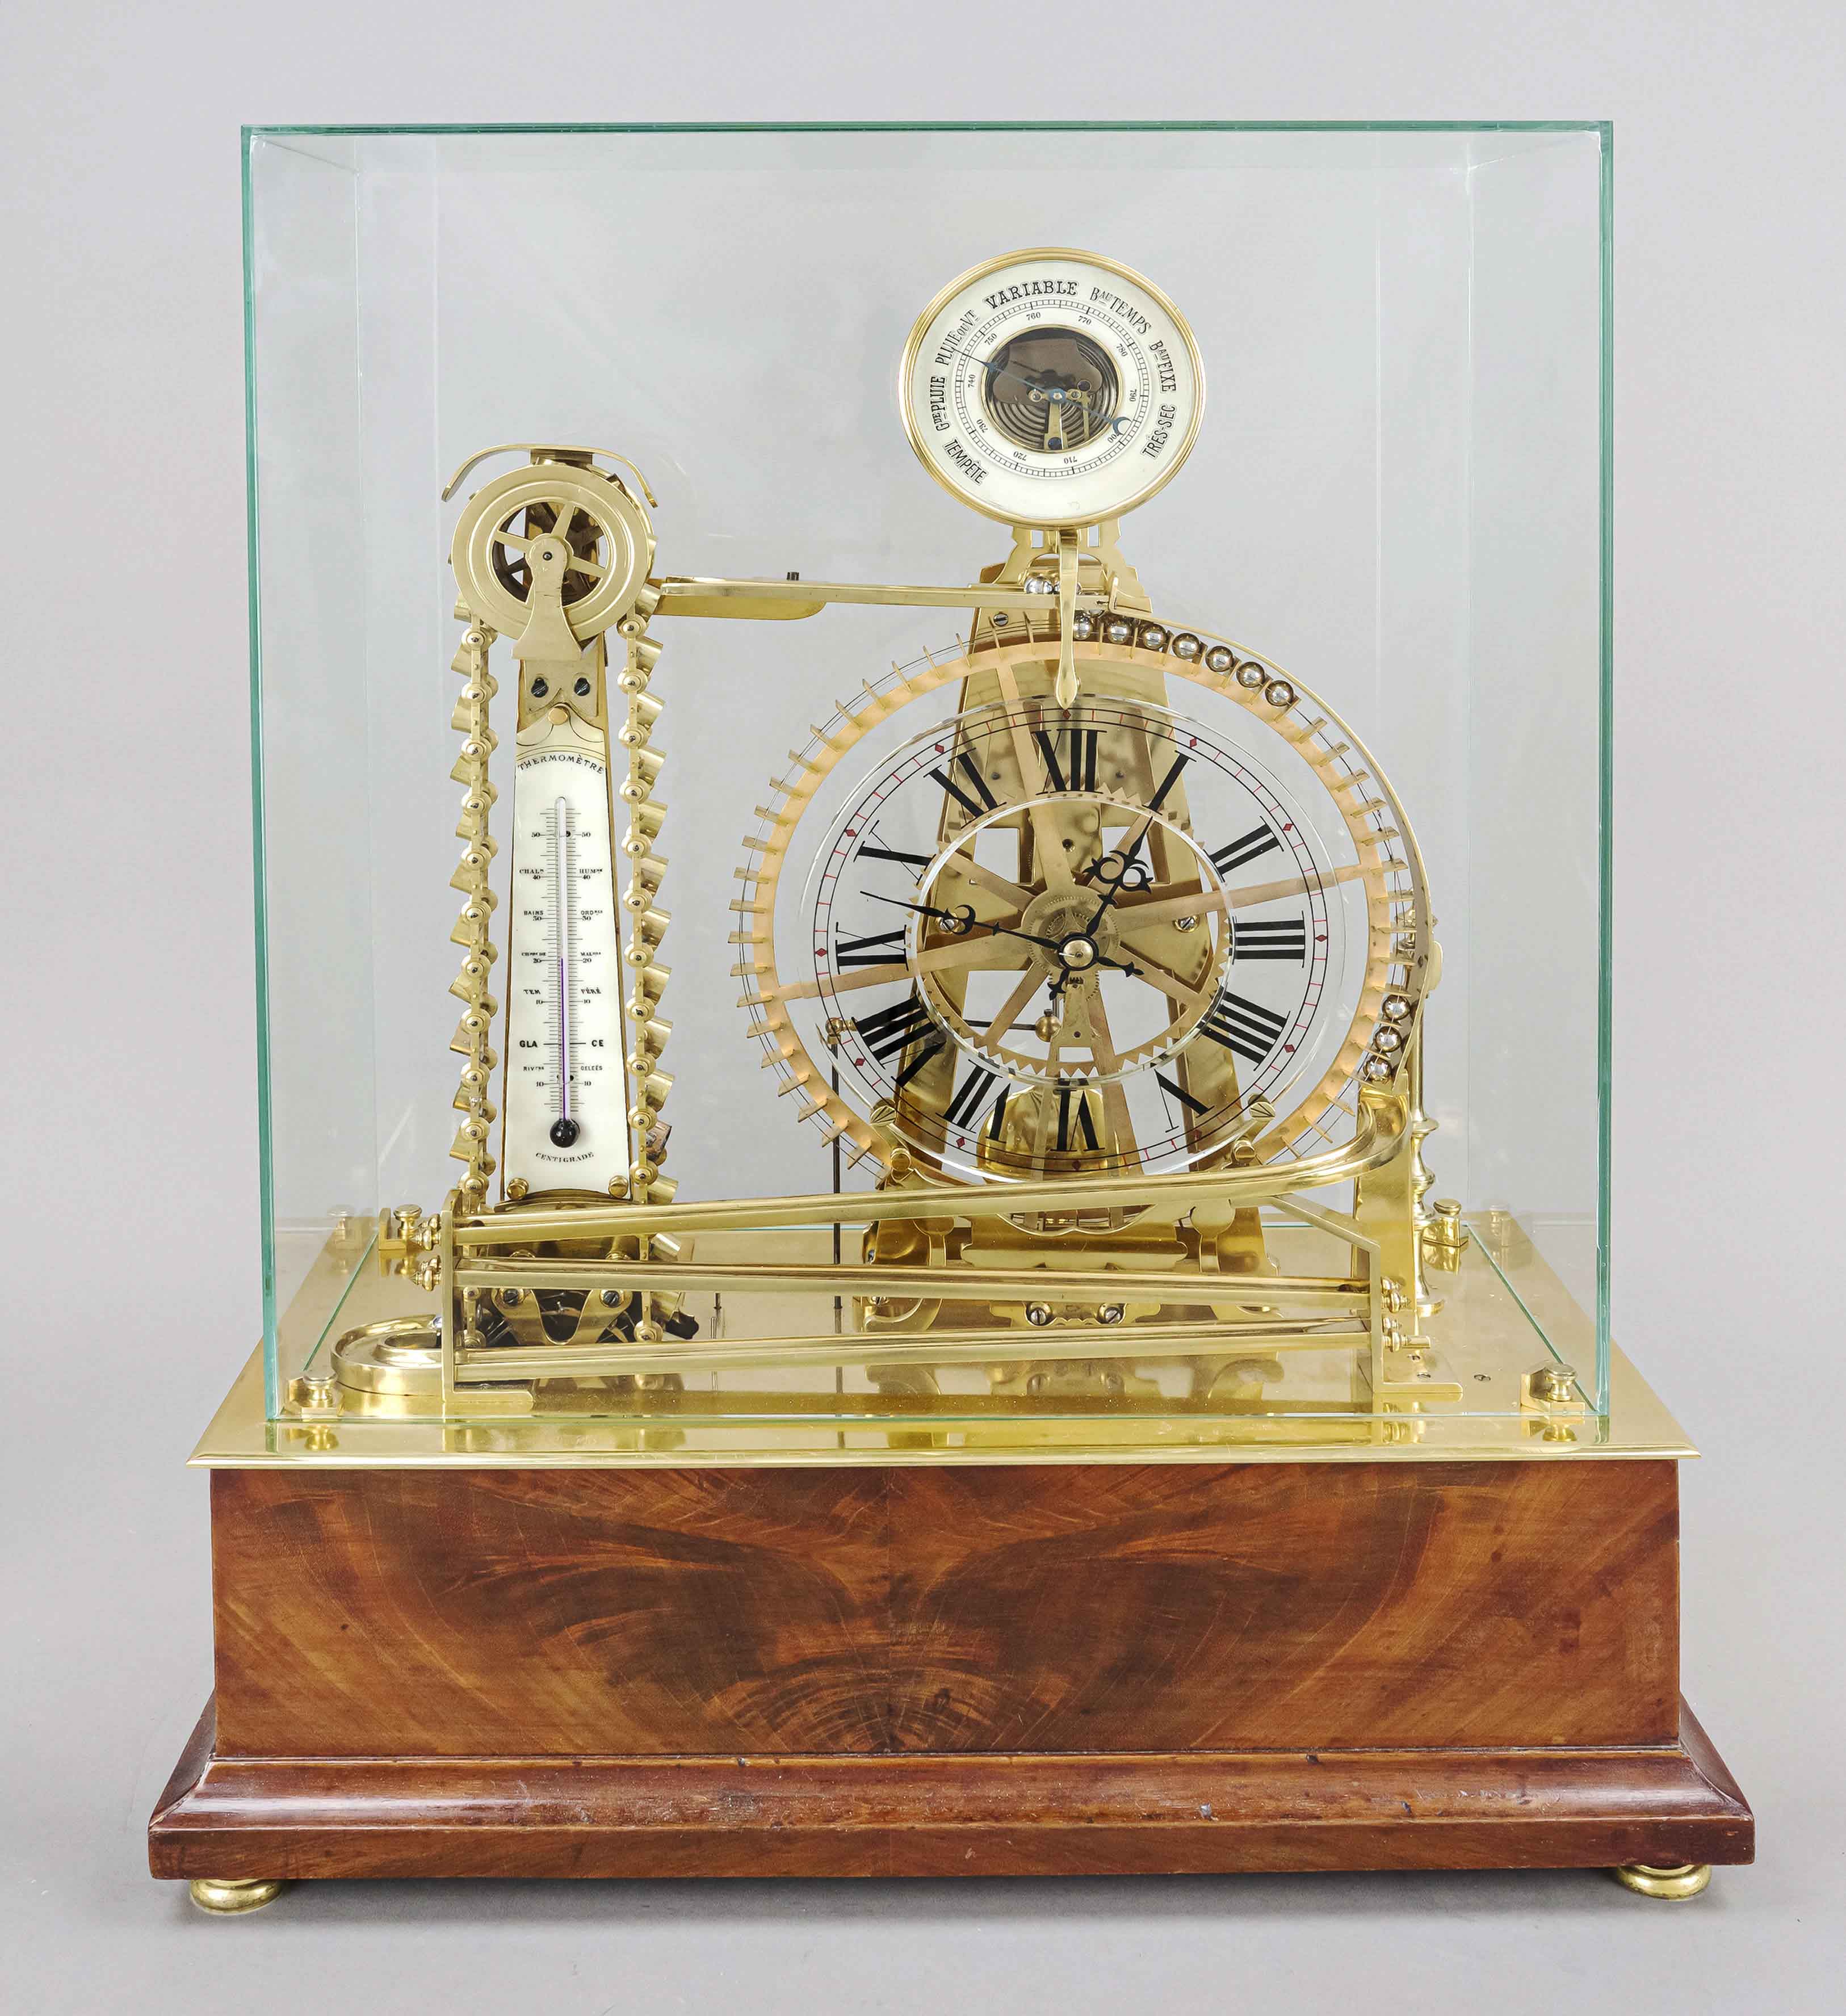 Ball movement clock under a glass lintel on a mahogany wooden base, c. 1840?? unidentified